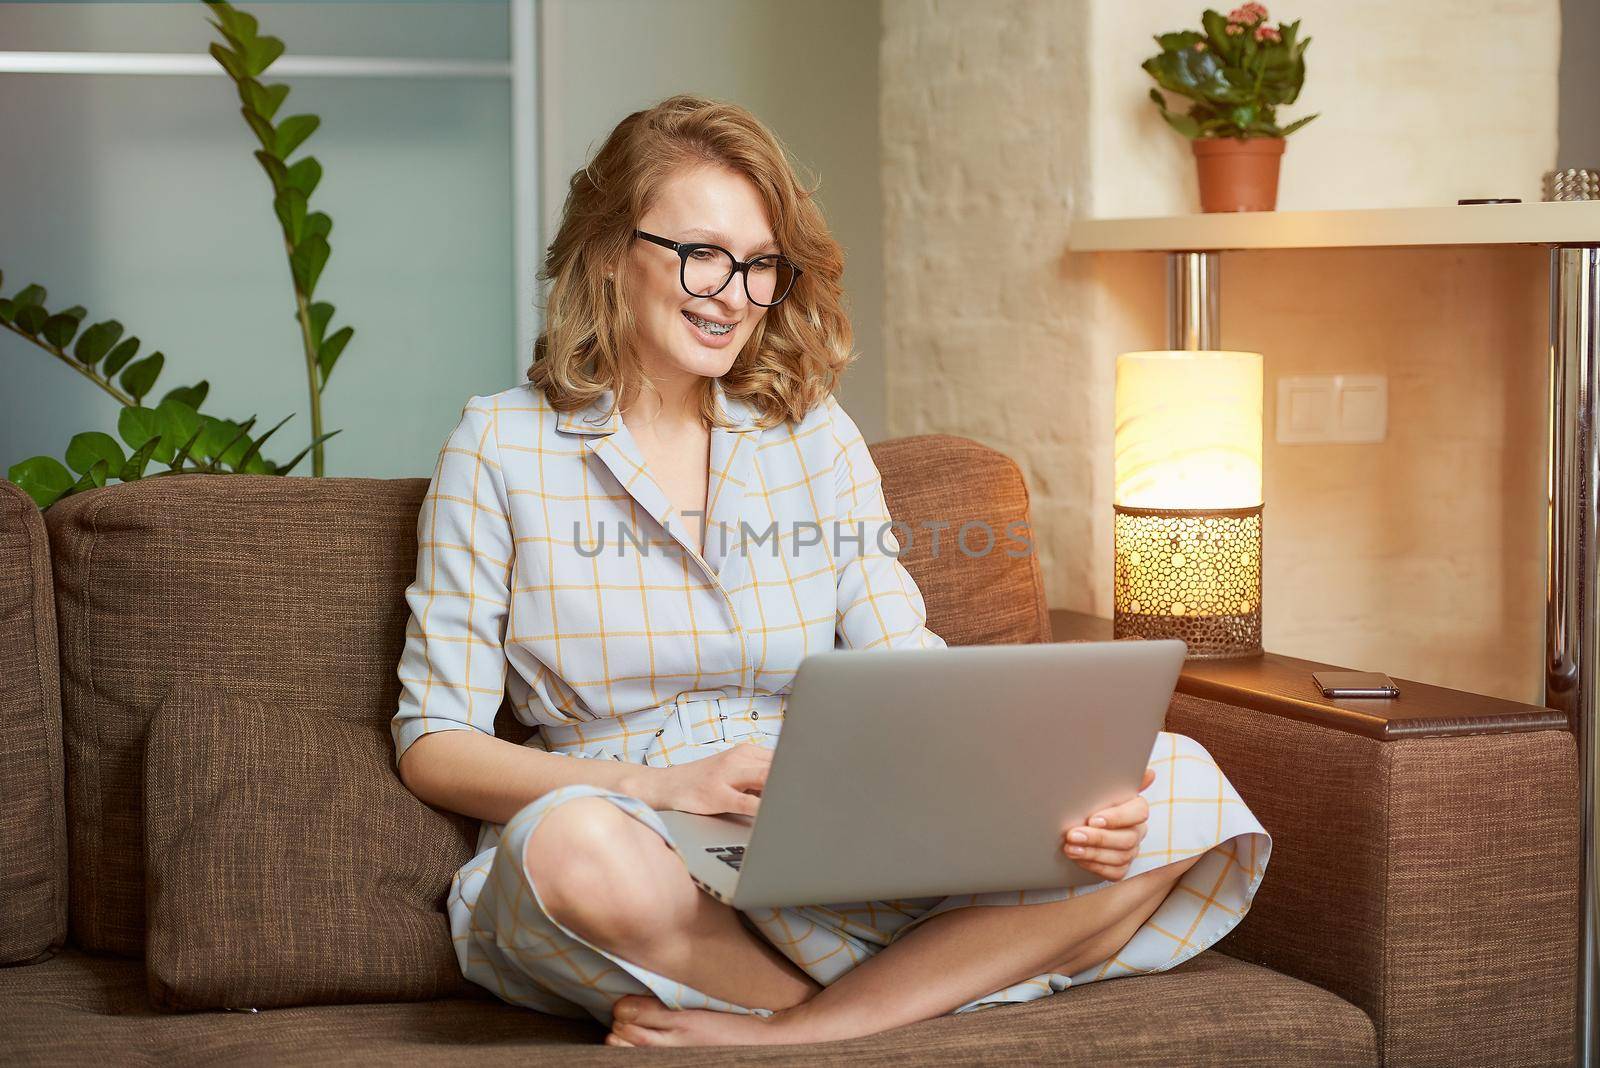 A woman in a dress sitting on the couch with legs crossed works remotely on a laptop in her apartment. A girl with braces watching a webinar. A female student in glasses listening to an online lecture